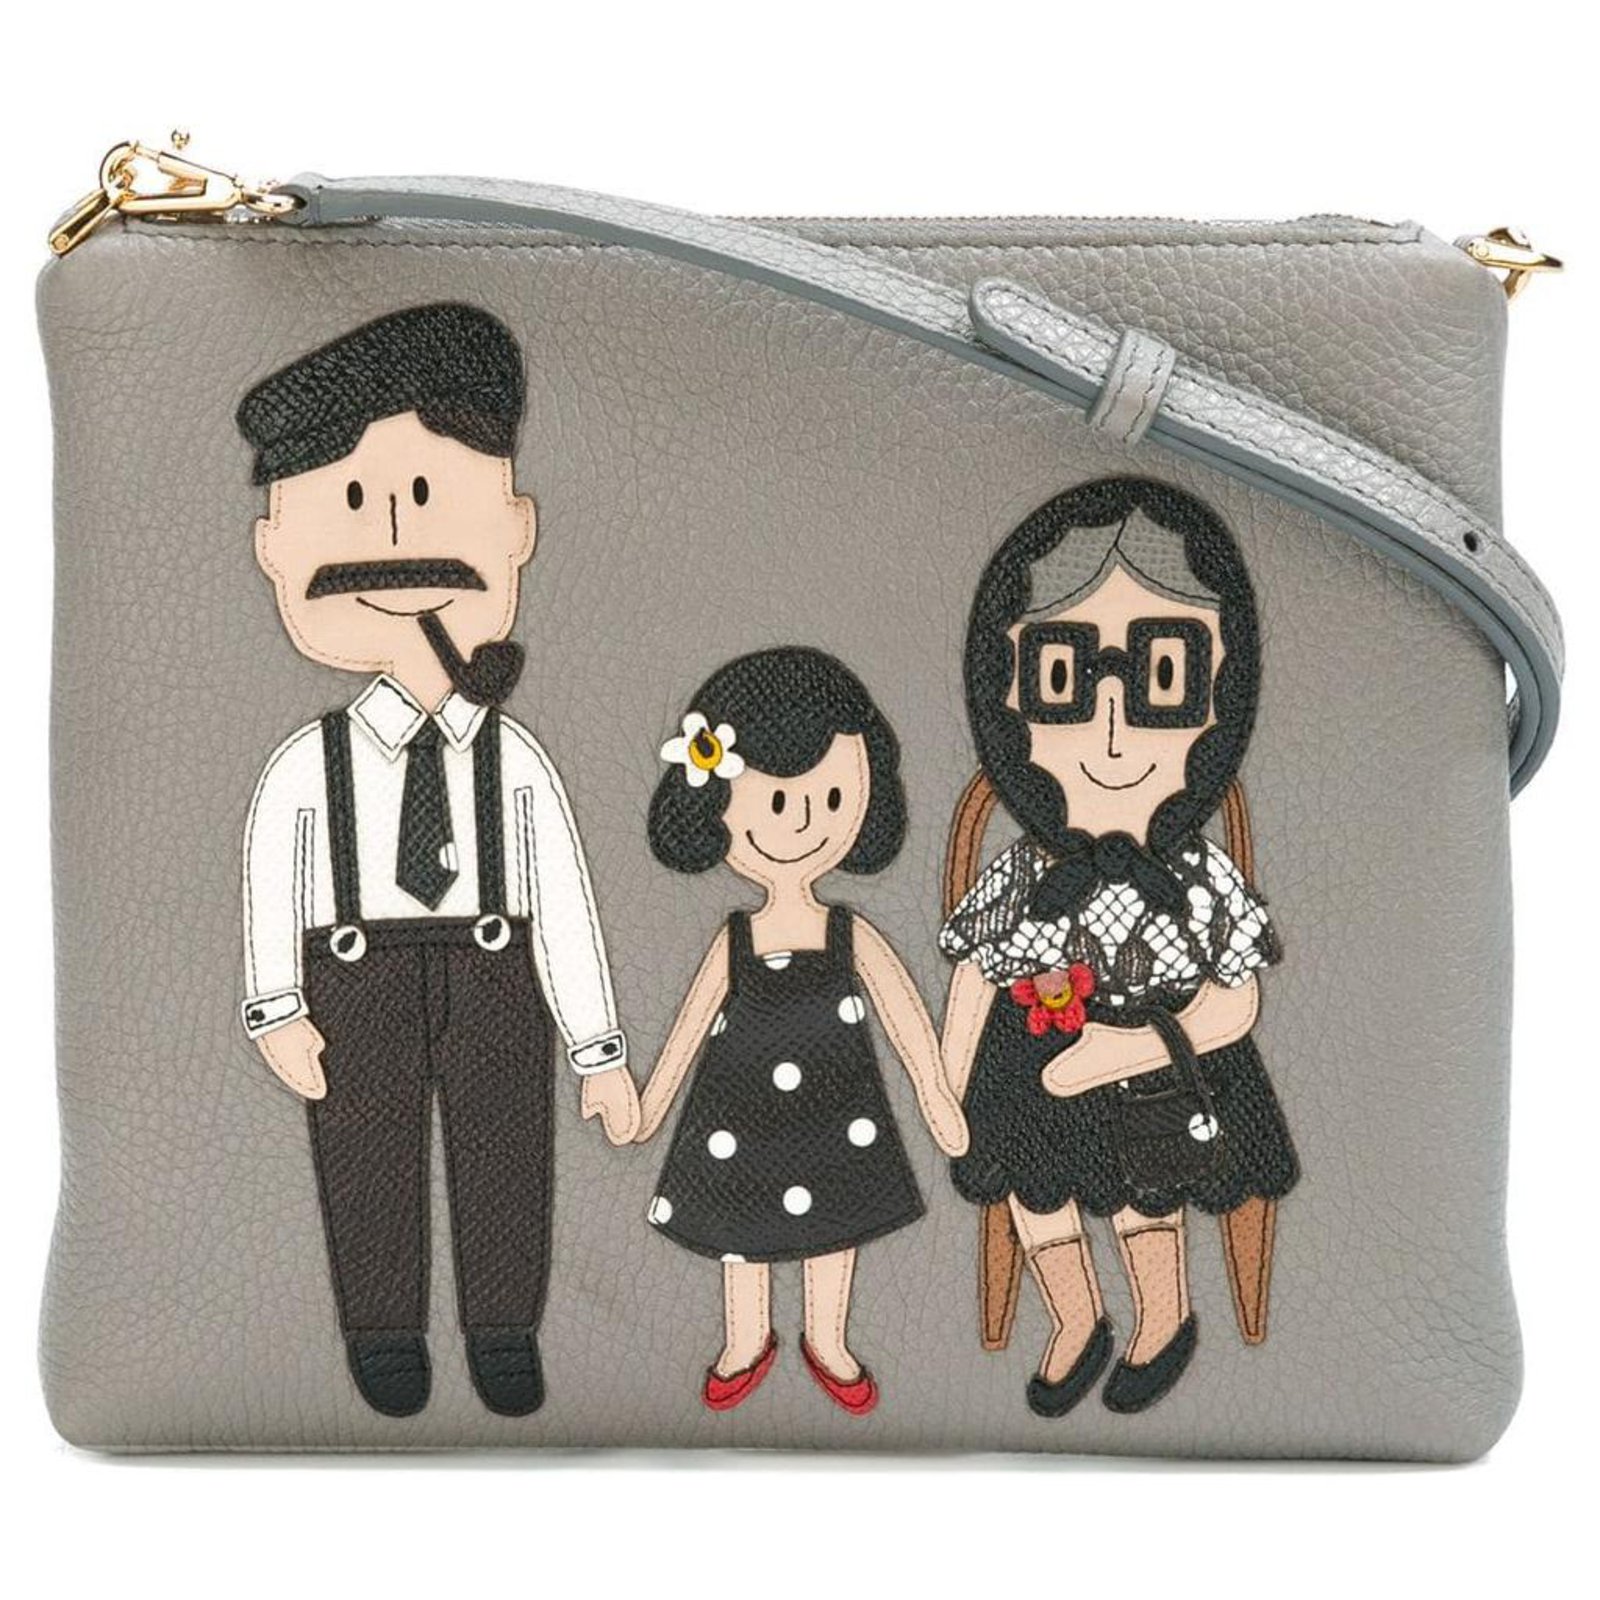 dolce and gabbana family bag.